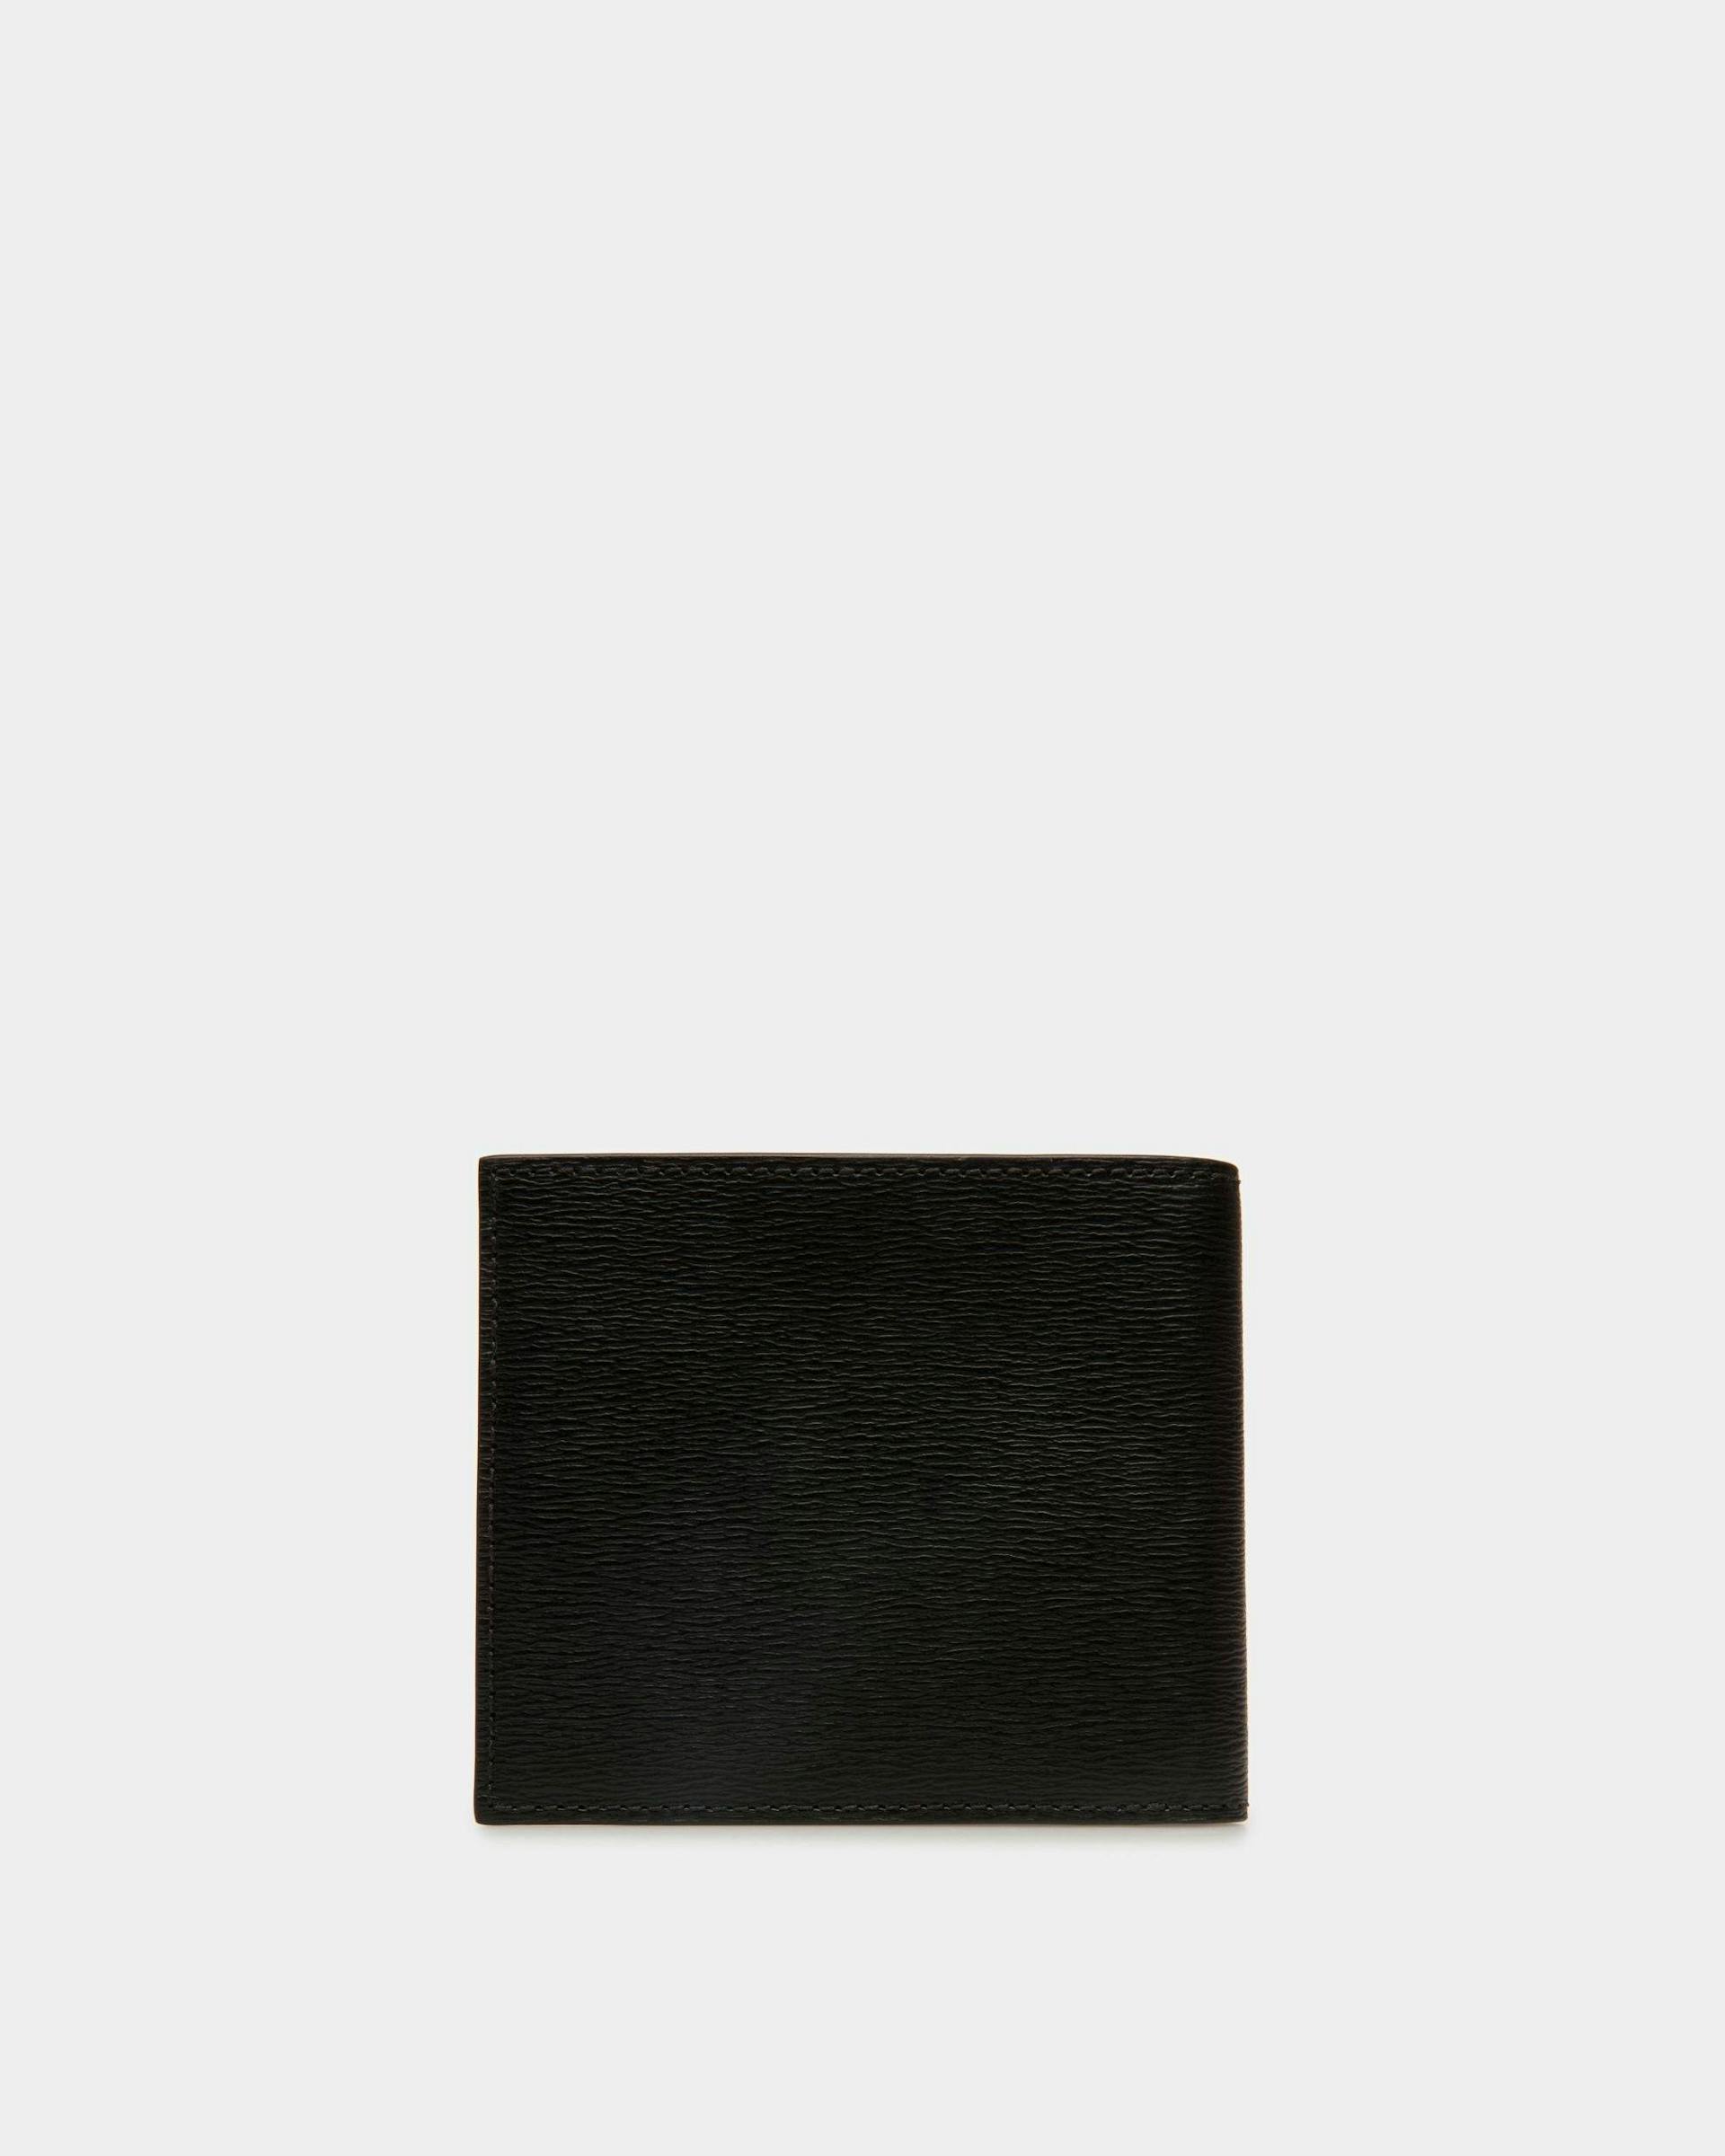 Men's Cny Bifold Wallet In Black And Red Grained Leather | Bally | Still Life Back